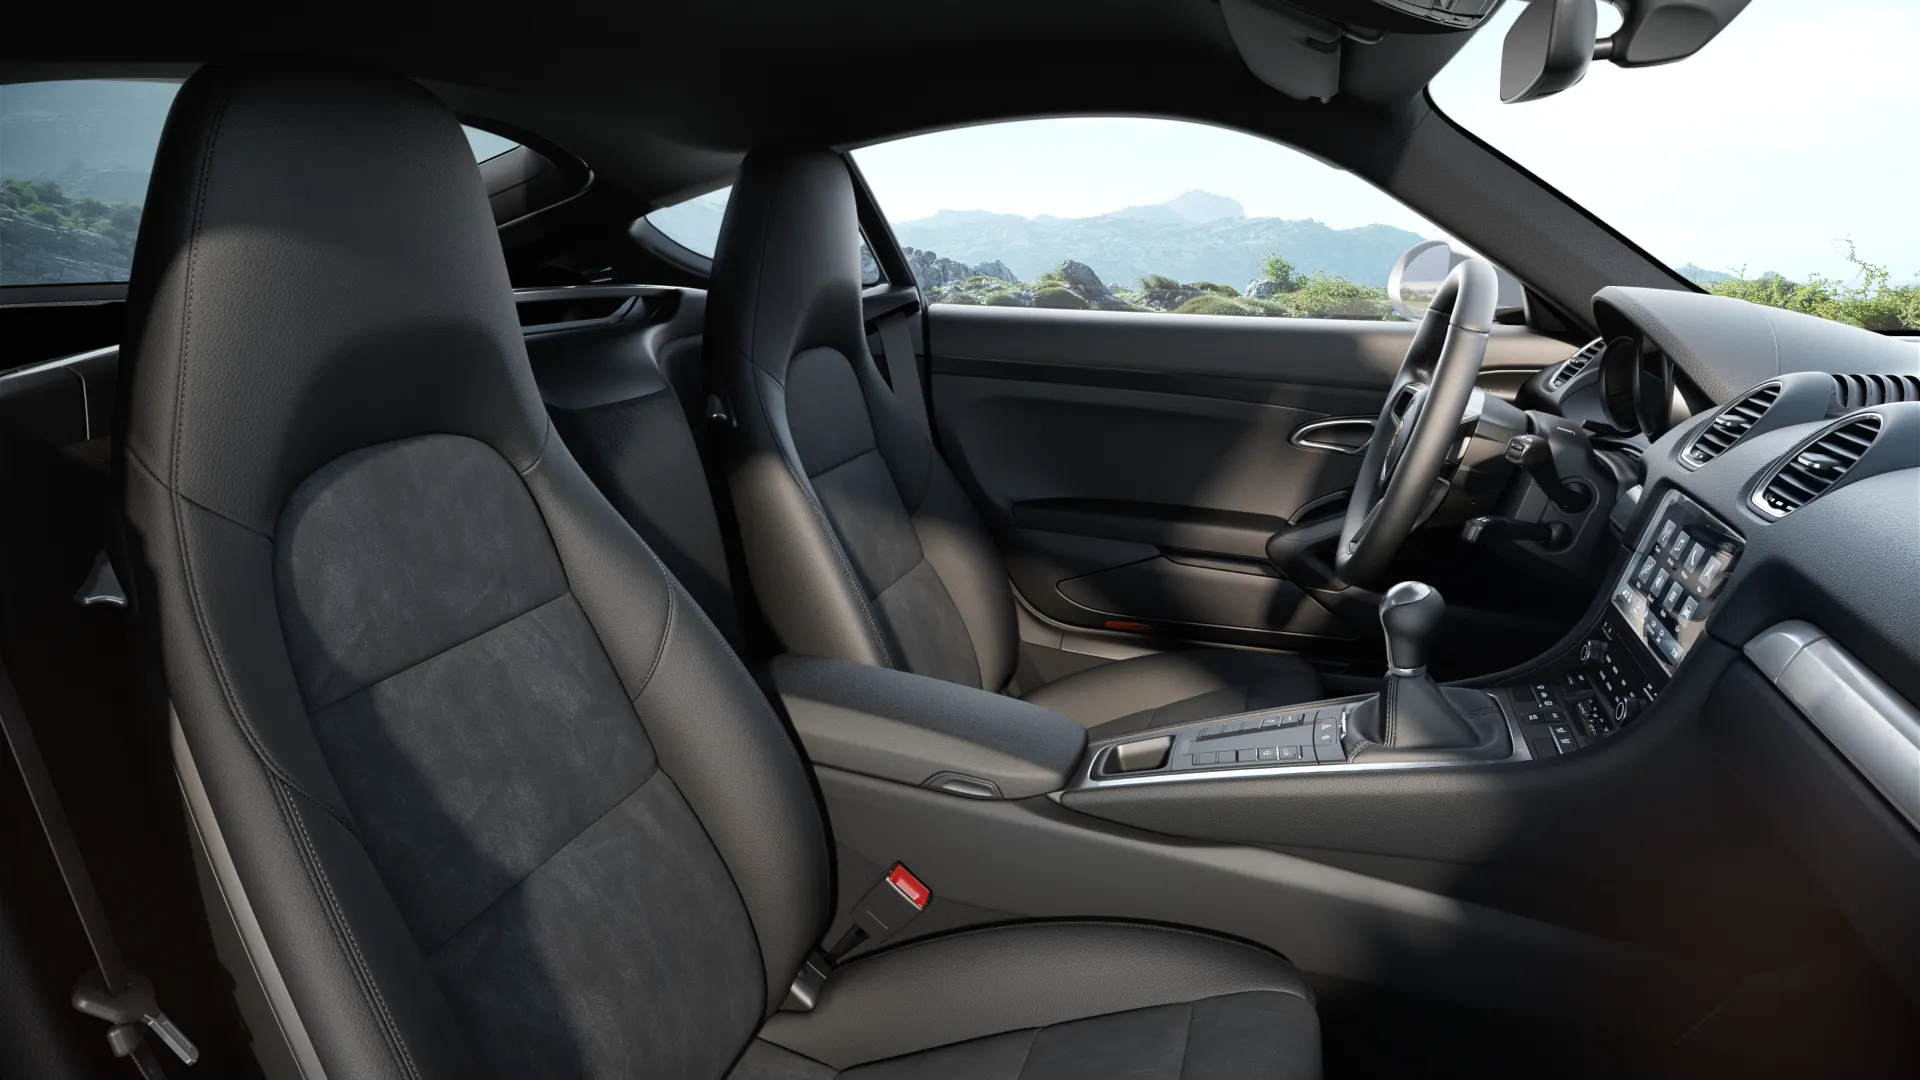 Interior view of 718 Cayman